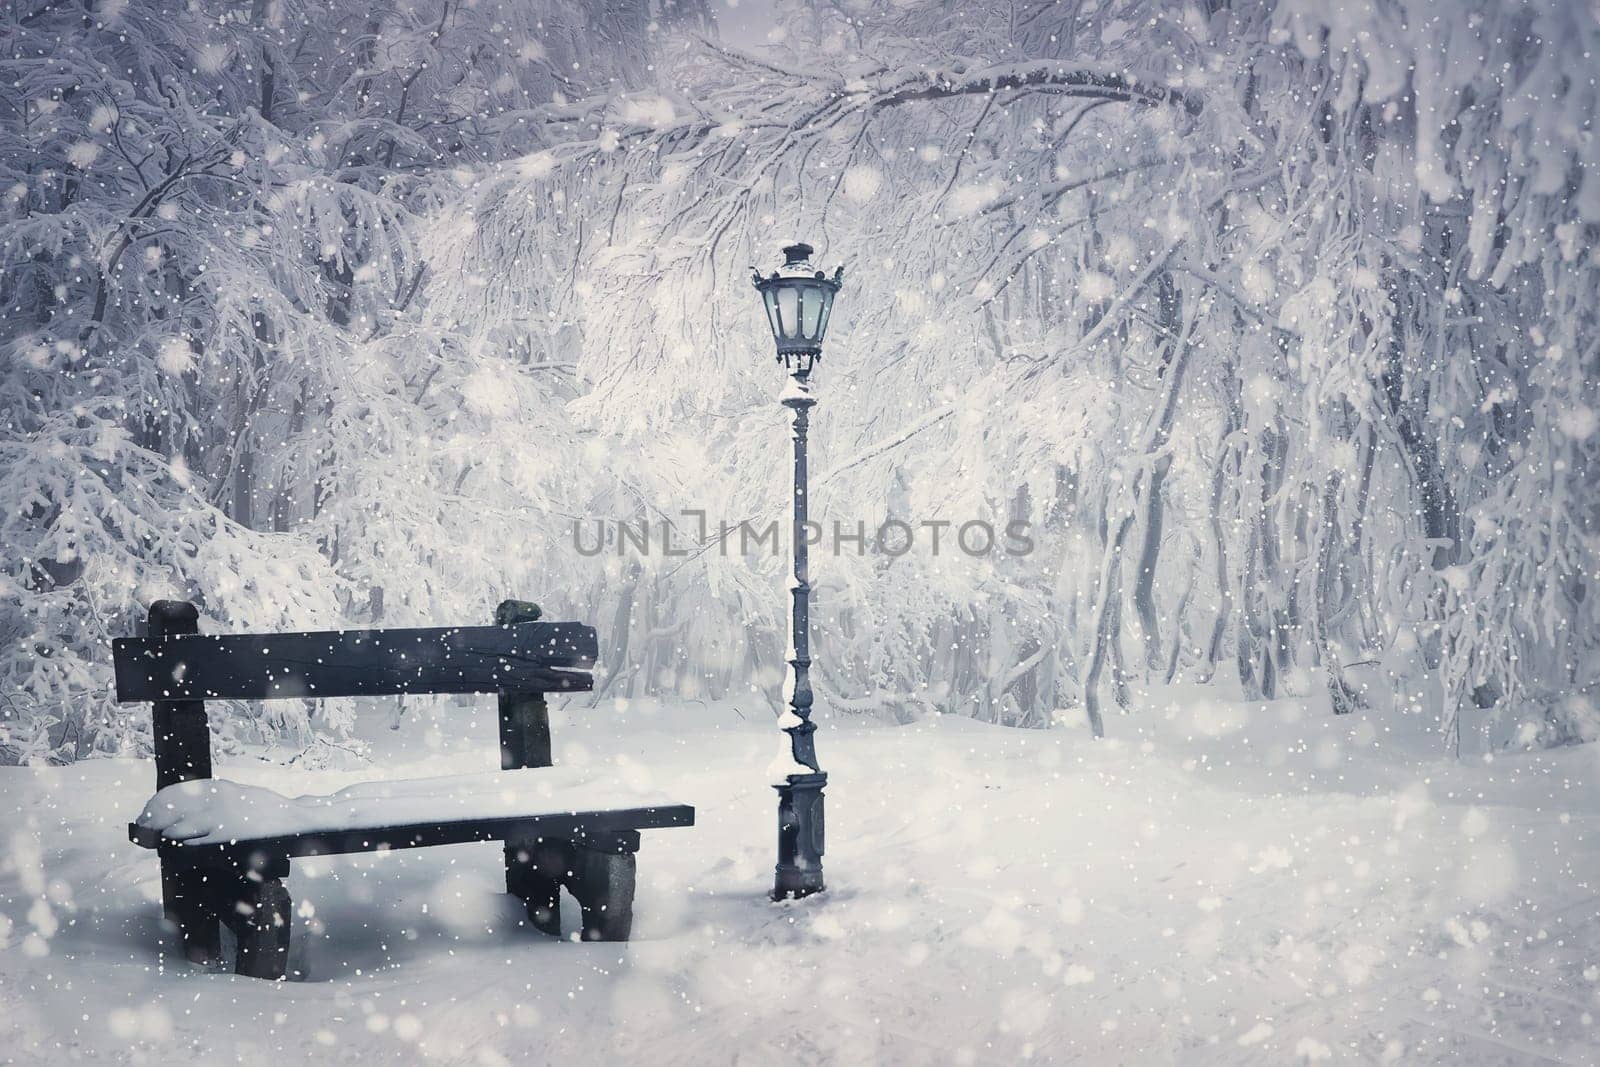 Winter time scene with a wooden bench and street lamp covered with snow under a snowfall in the park. Wonderful holiday season background, Merry Christmas magic atmosphere. Tranquil and peaceful view